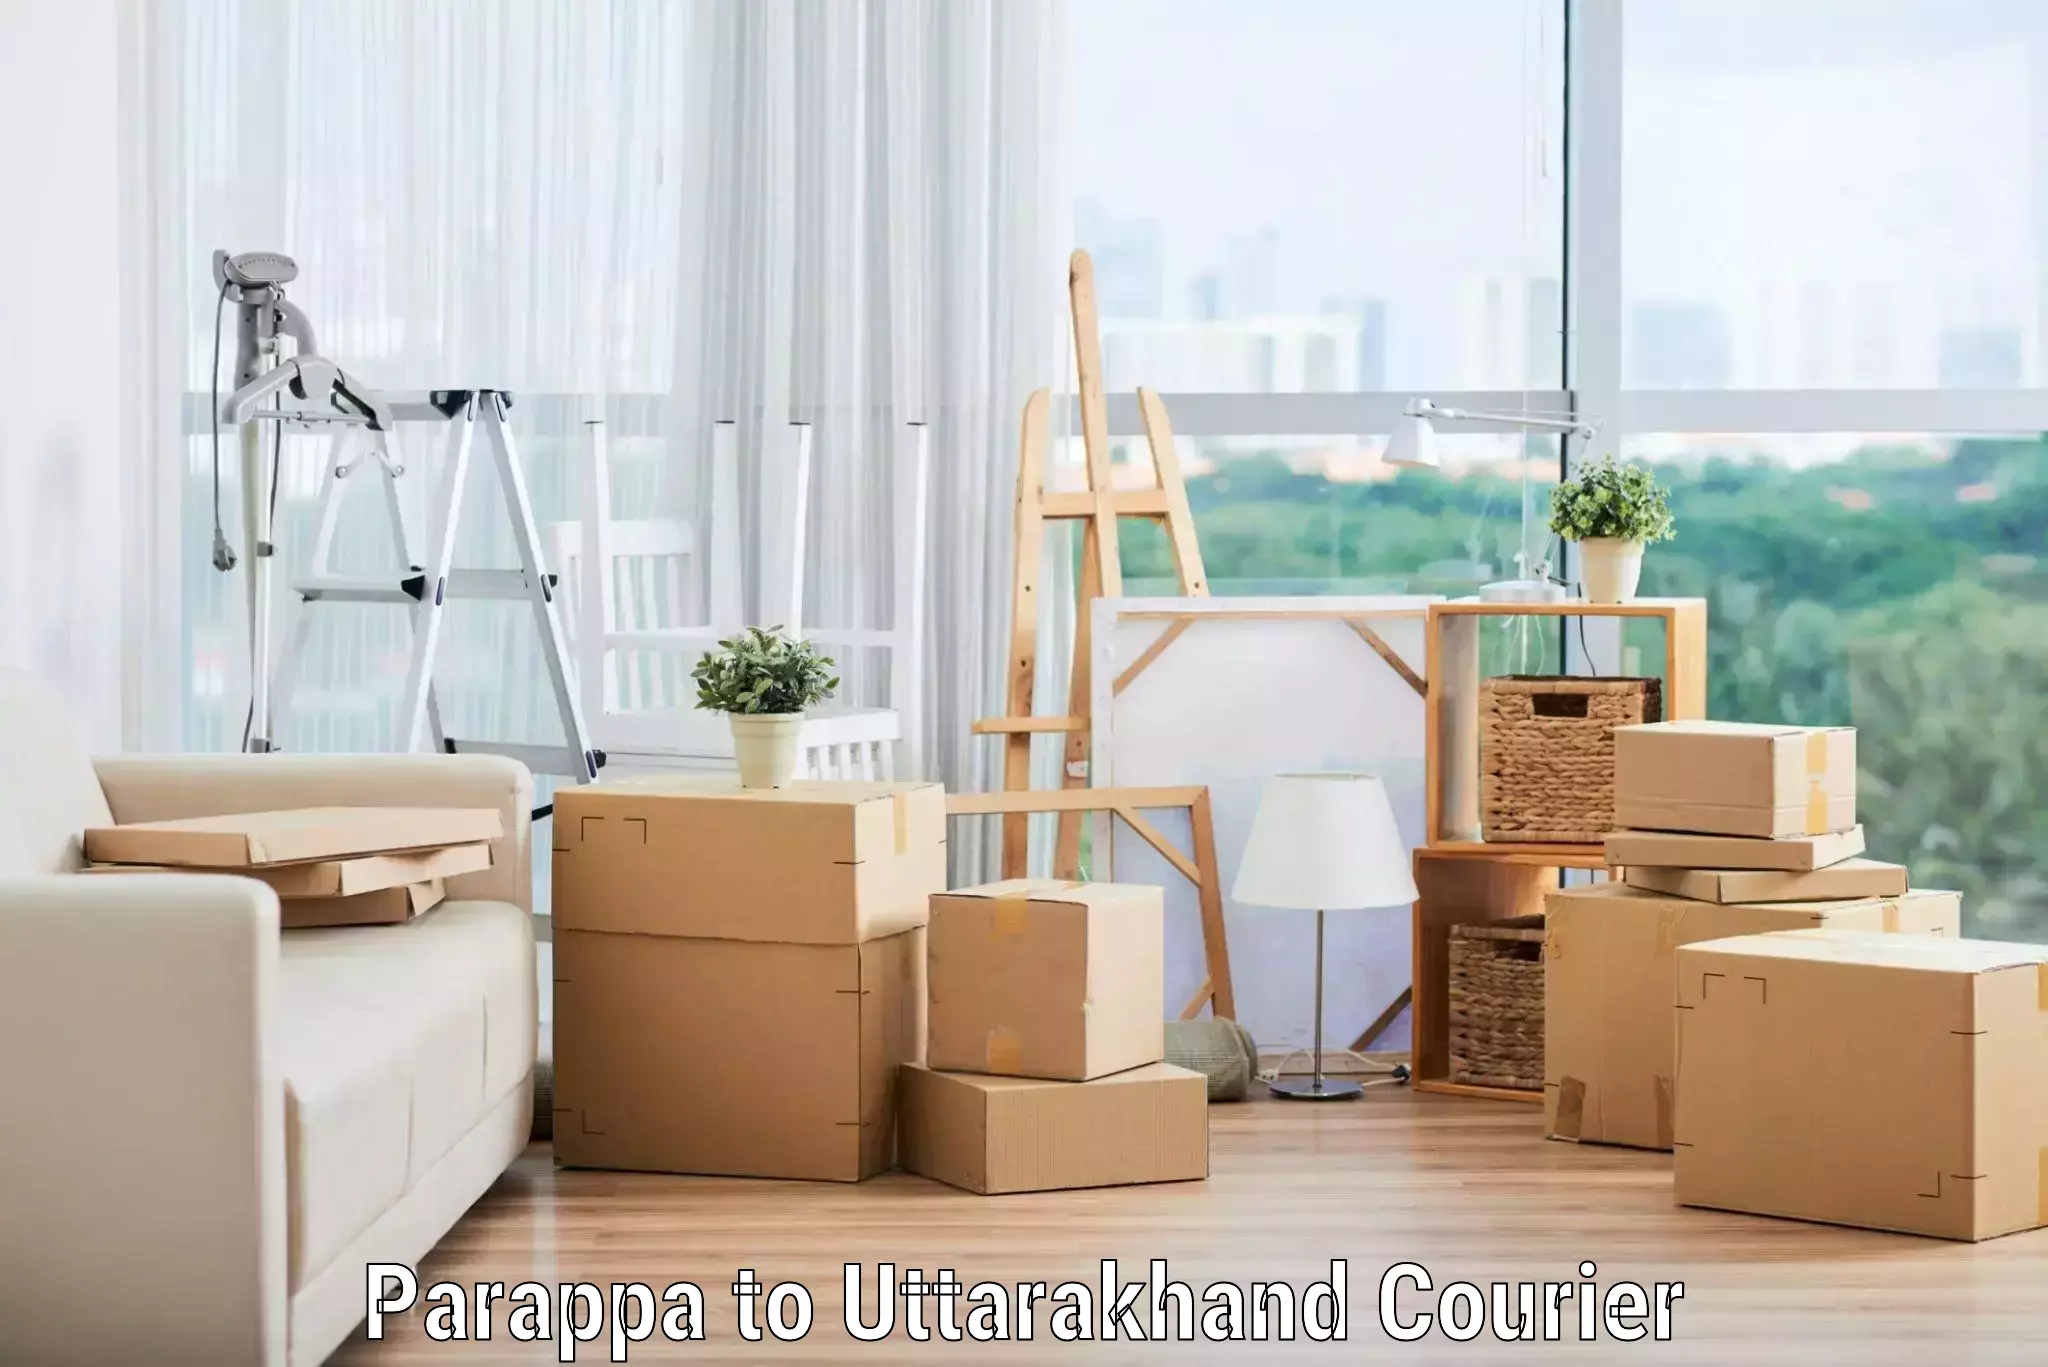 Dependable moving services Parappa to Uttarakhand